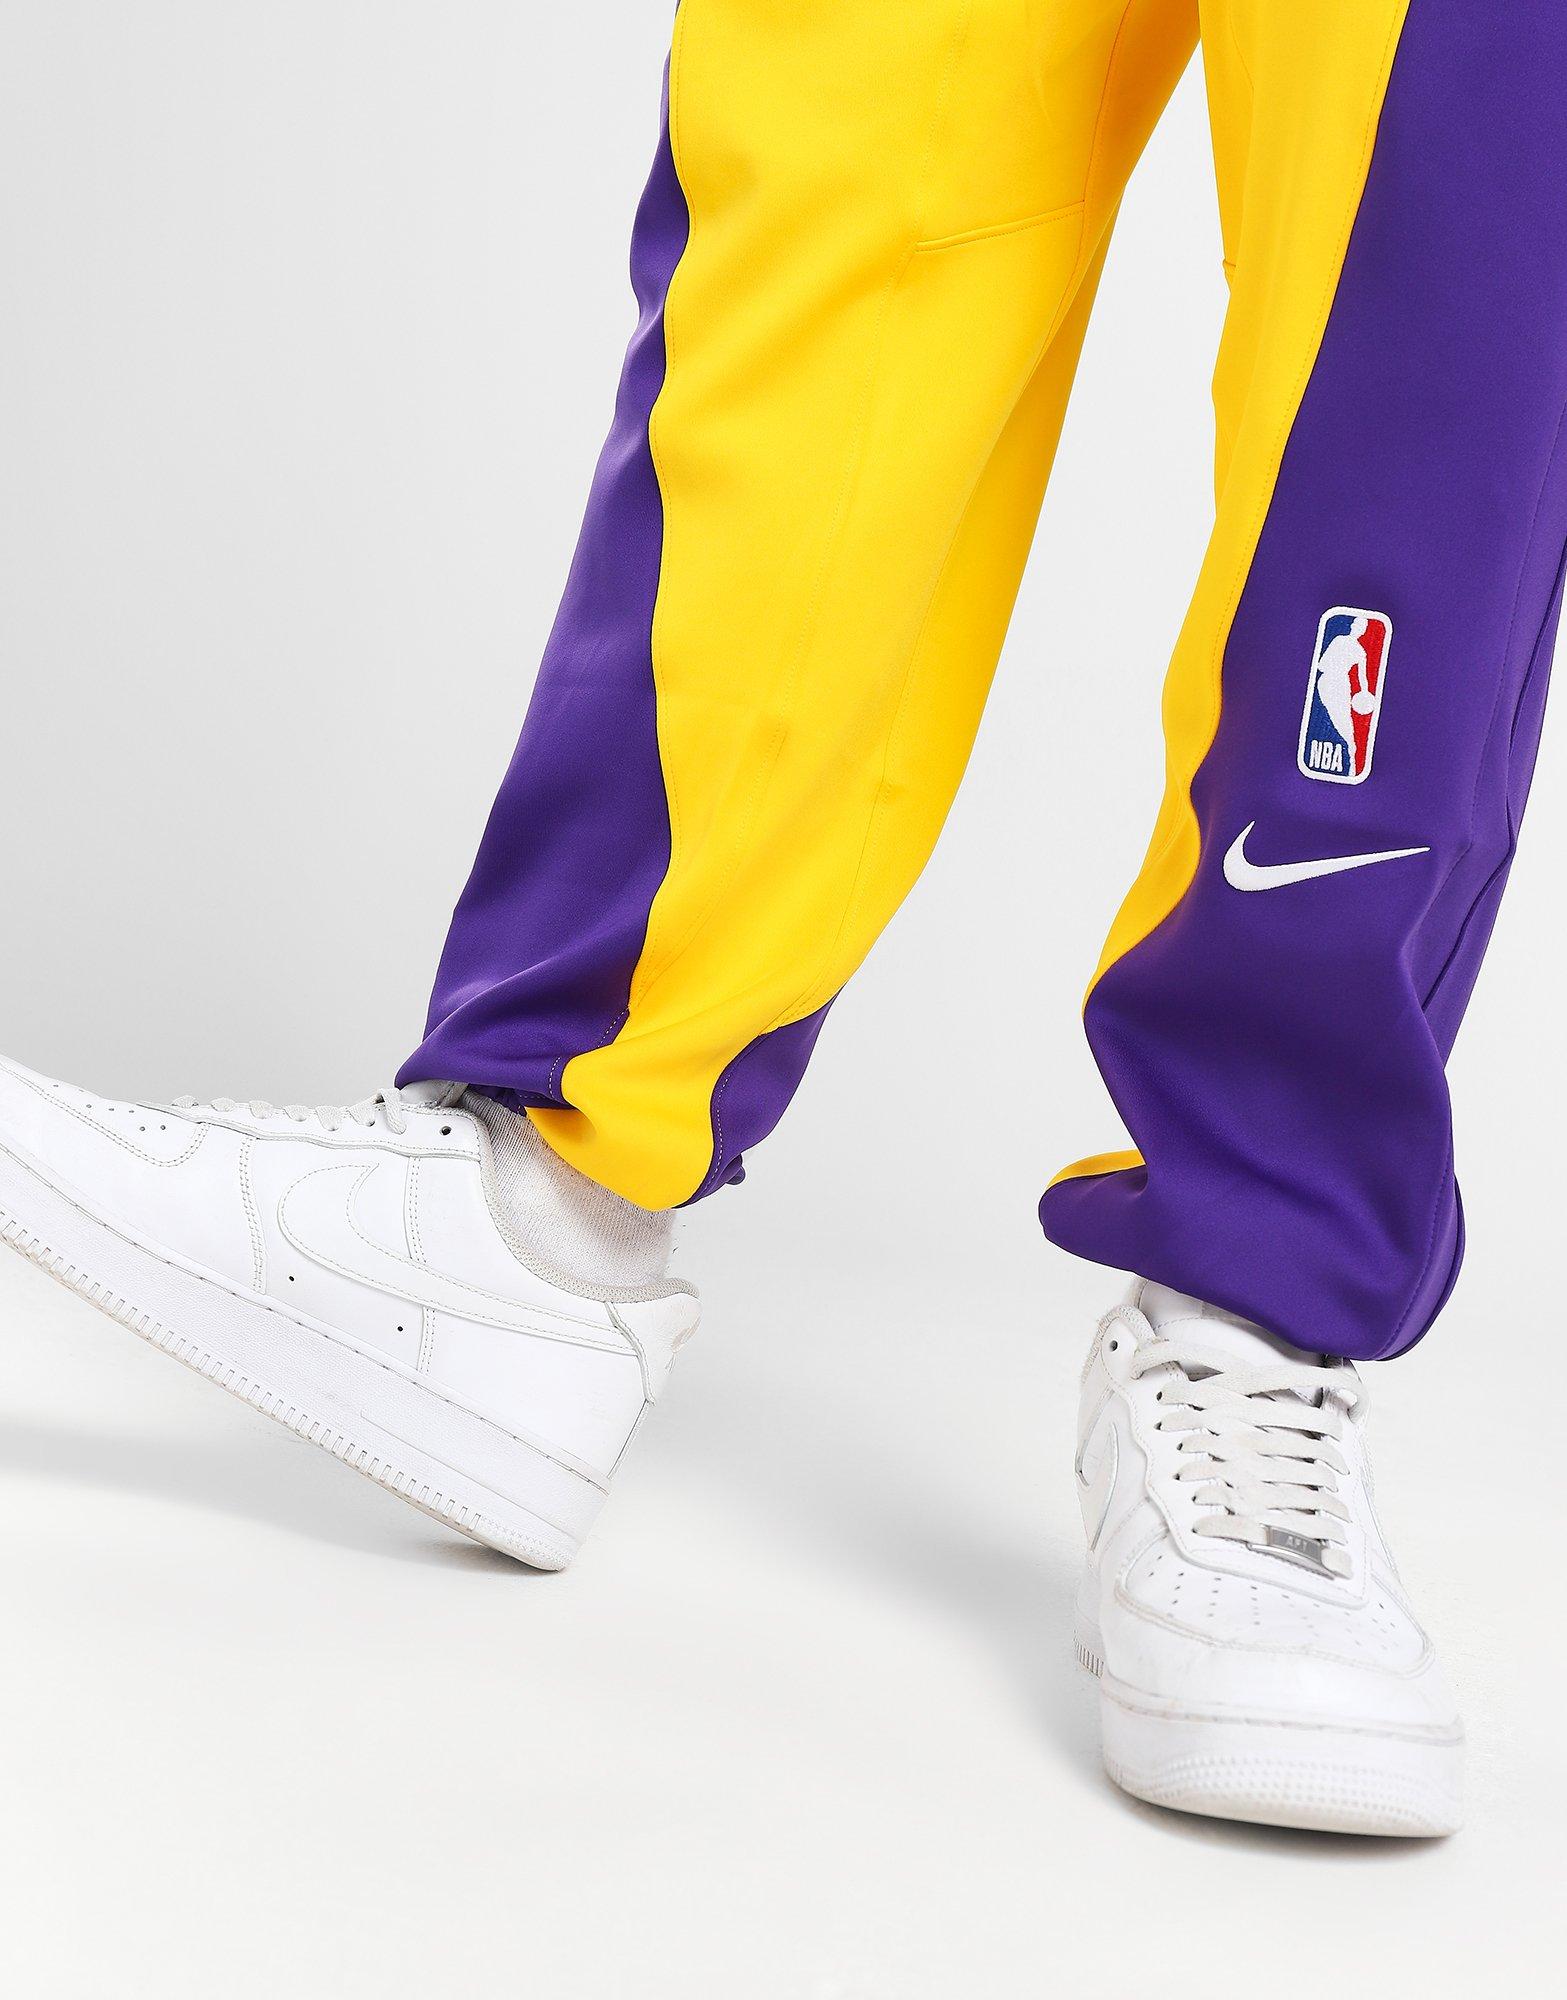 Todd Snyder x NBA Lakers Track Pant